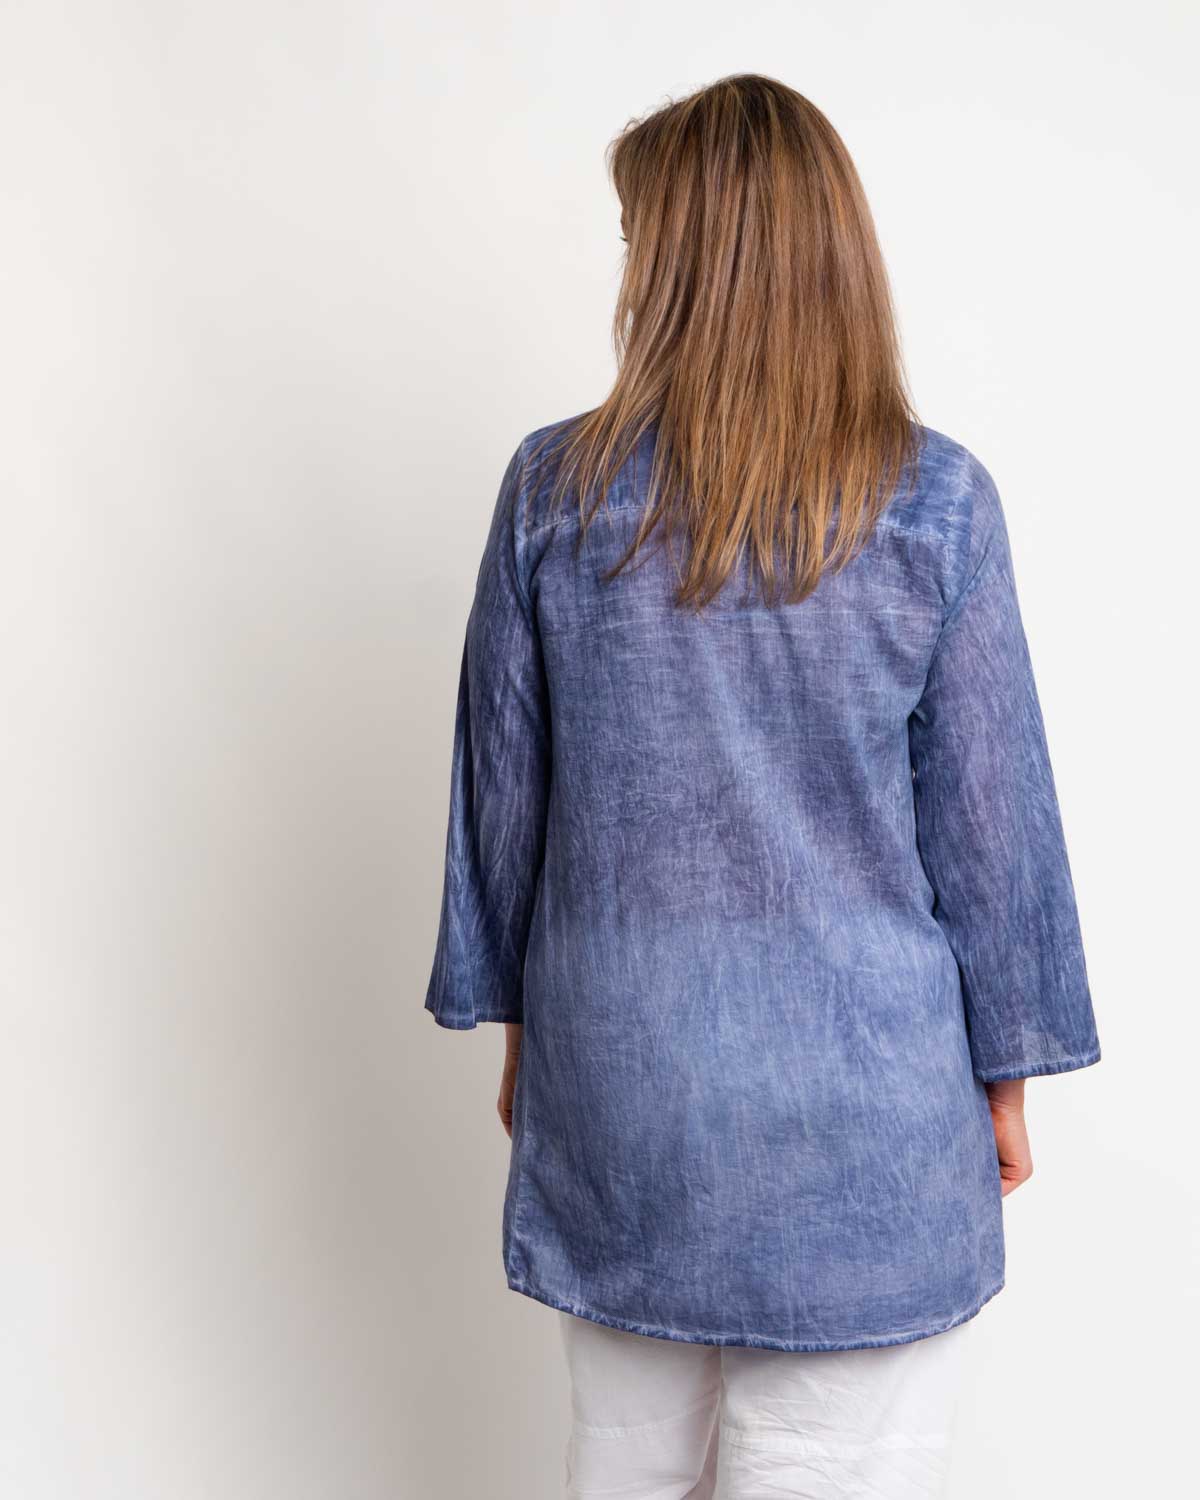 Pleated Summer Top in Blue Wash